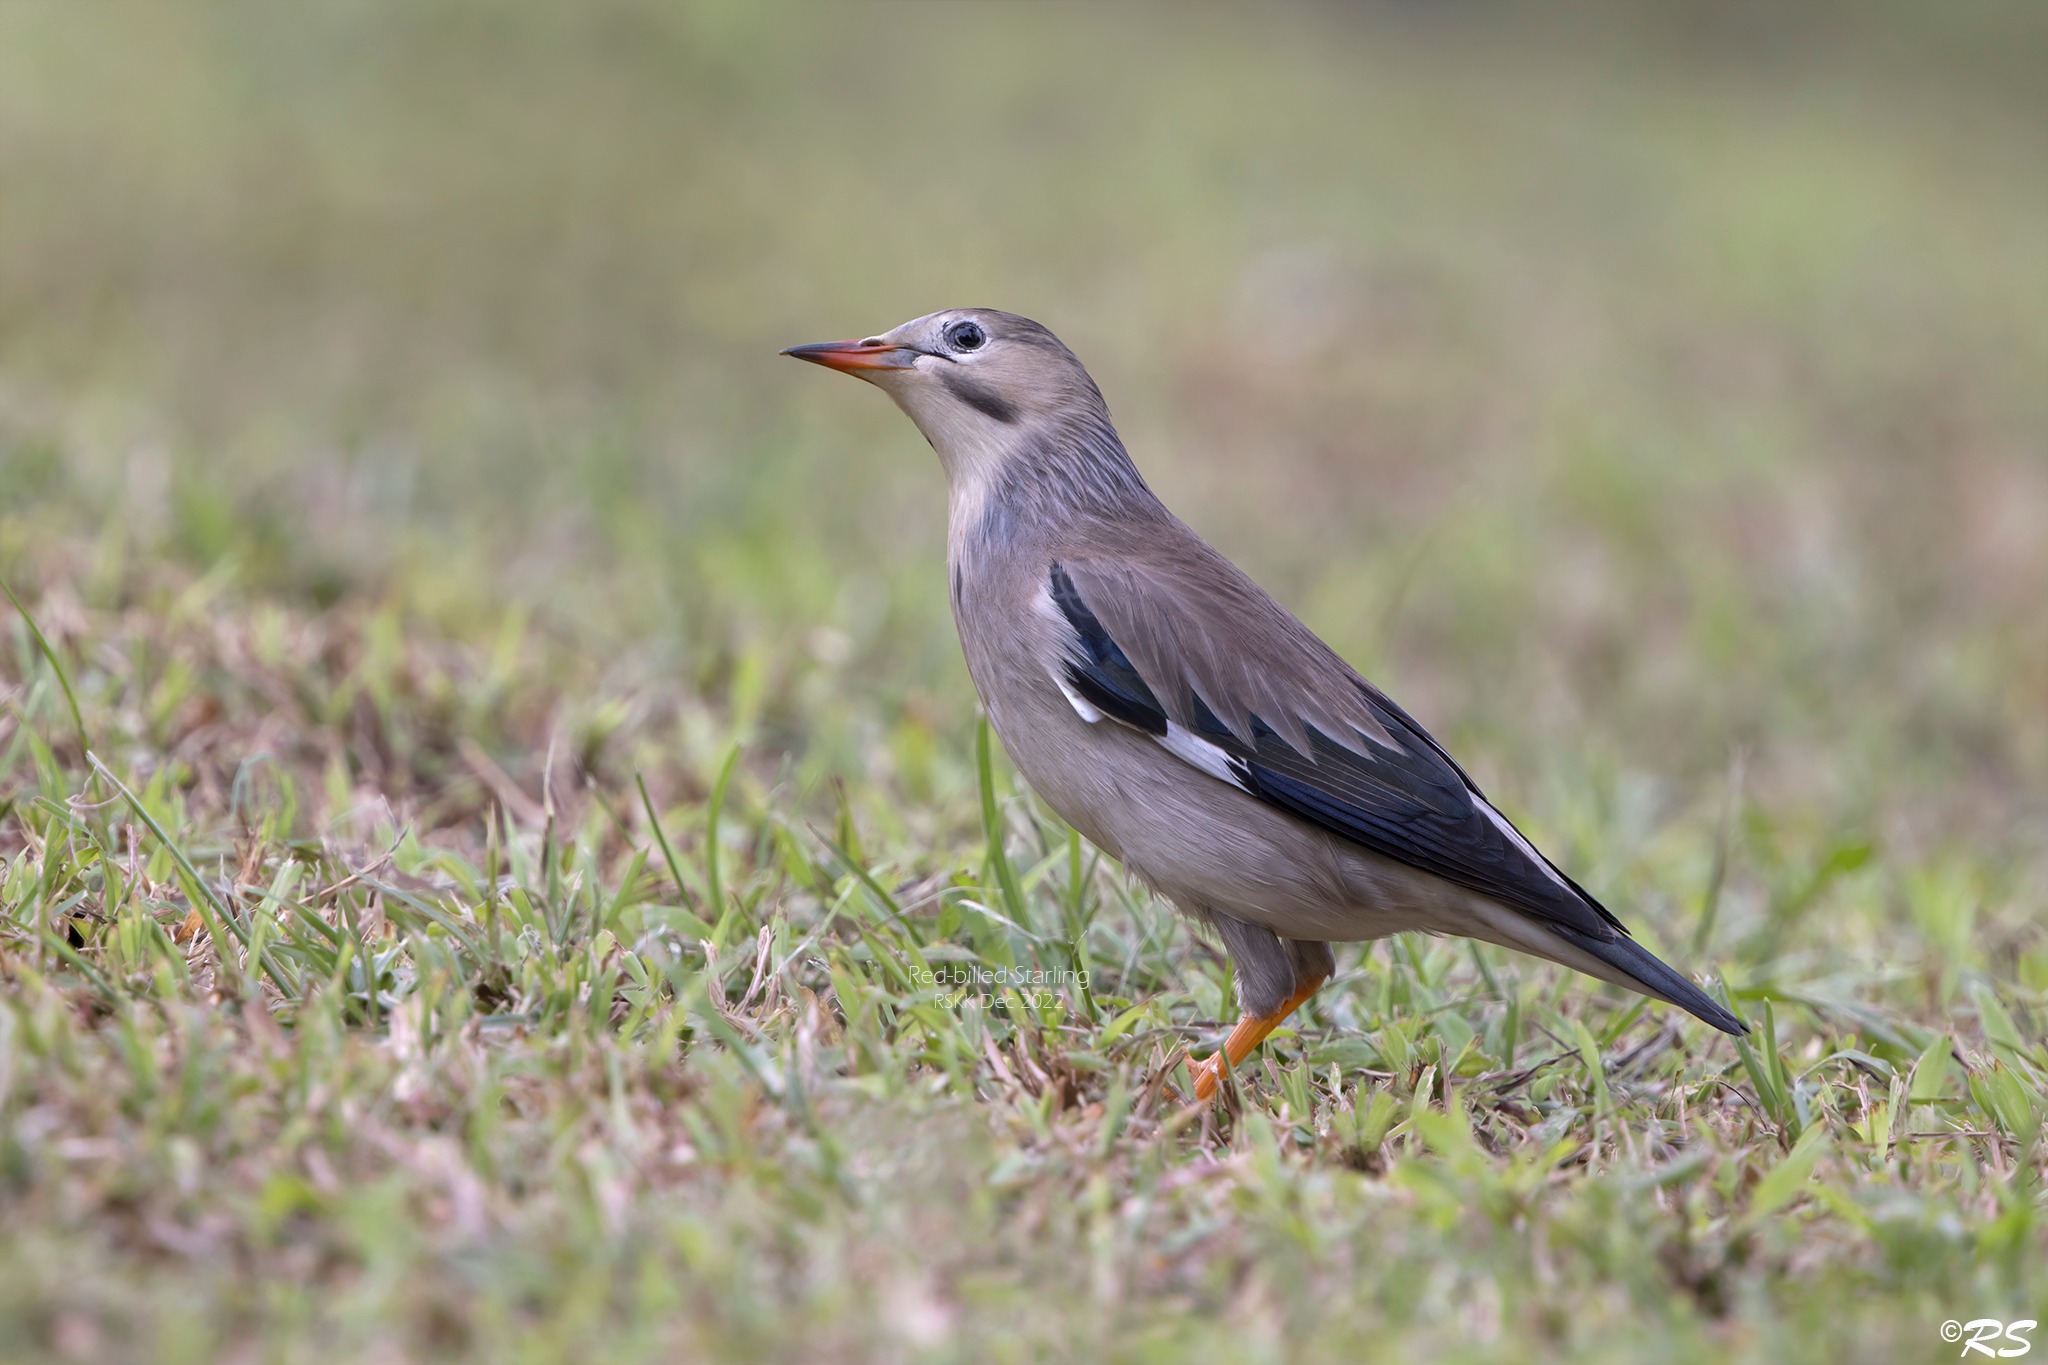 Red-billed Starling at Dempsey Hill. Photo credit: Raymond Siew